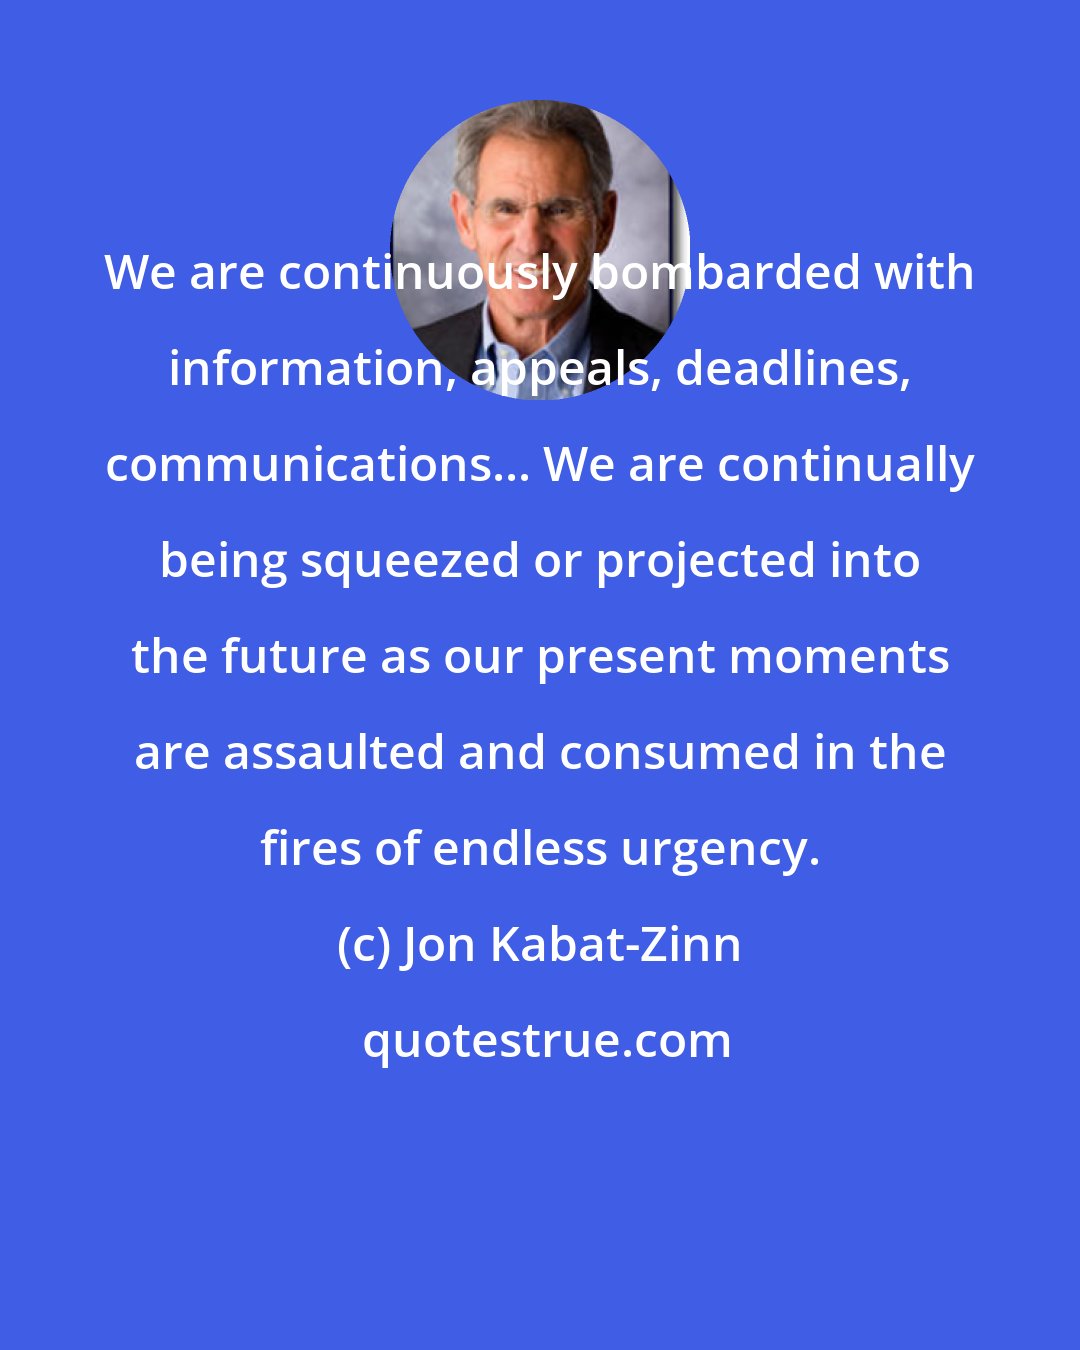 Jon Kabat-Zinn: We are continuously bombarded with information, appeals, deadlines, communications... We are continually being squeezed or projected into the future as our present moments are assaulted and consumed in the fires of endless urgency.